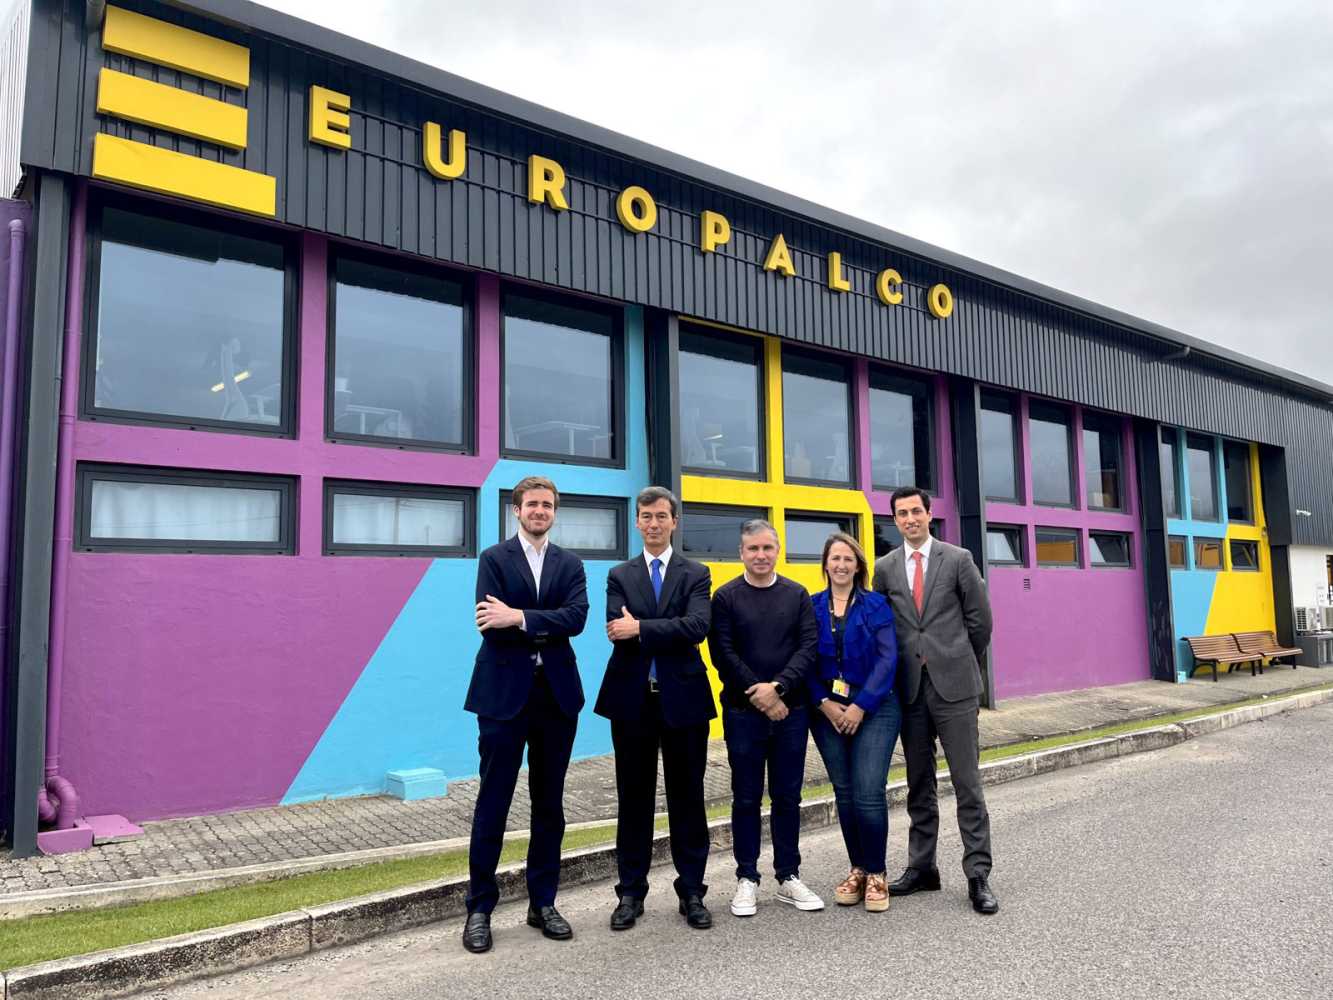 This partnership will allow Europalco to continue its growth, through regional expansion